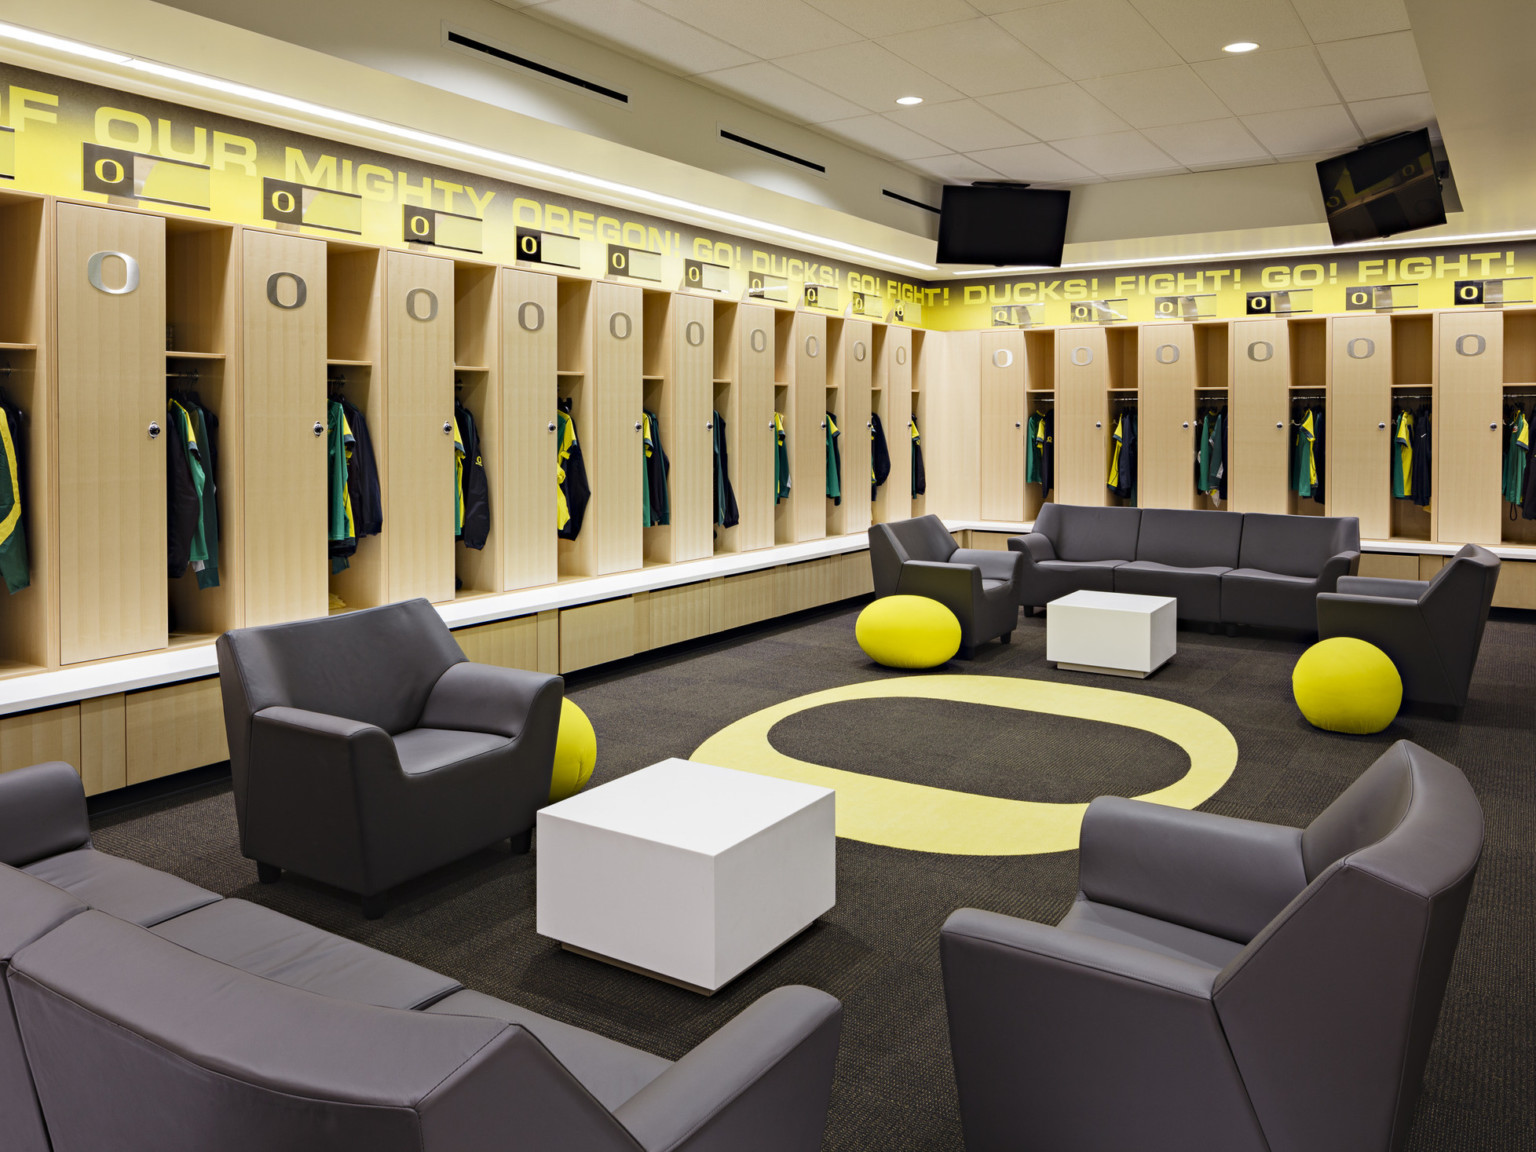 Locker room with yellow oregon logo center with wood lockers, black couches and arm chairs. UO fight chant along wall trim